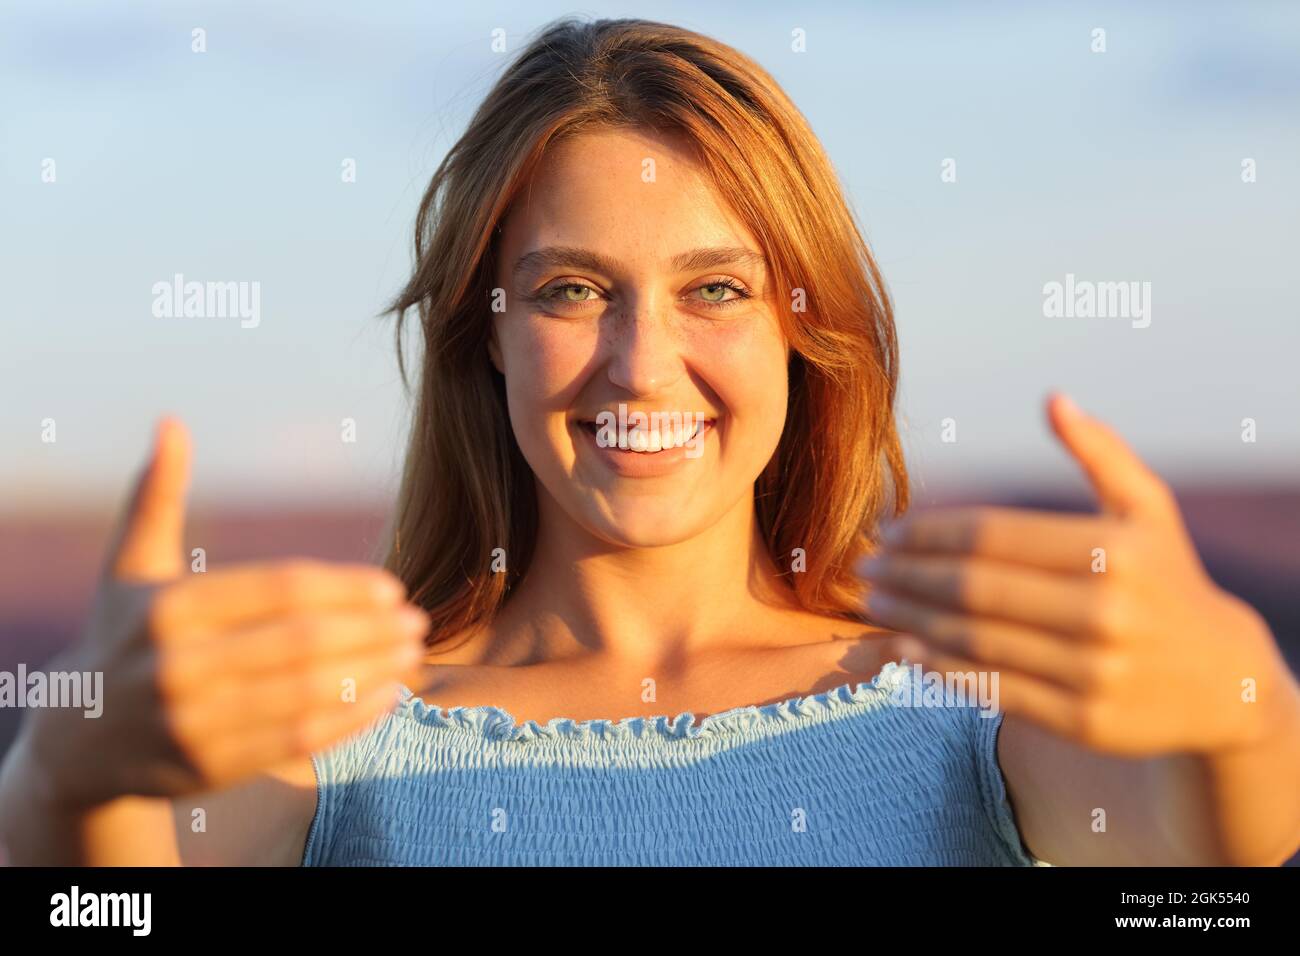 Front view portrait of a happy woman inviting you gesturing with hands in lavender field Stock Photo